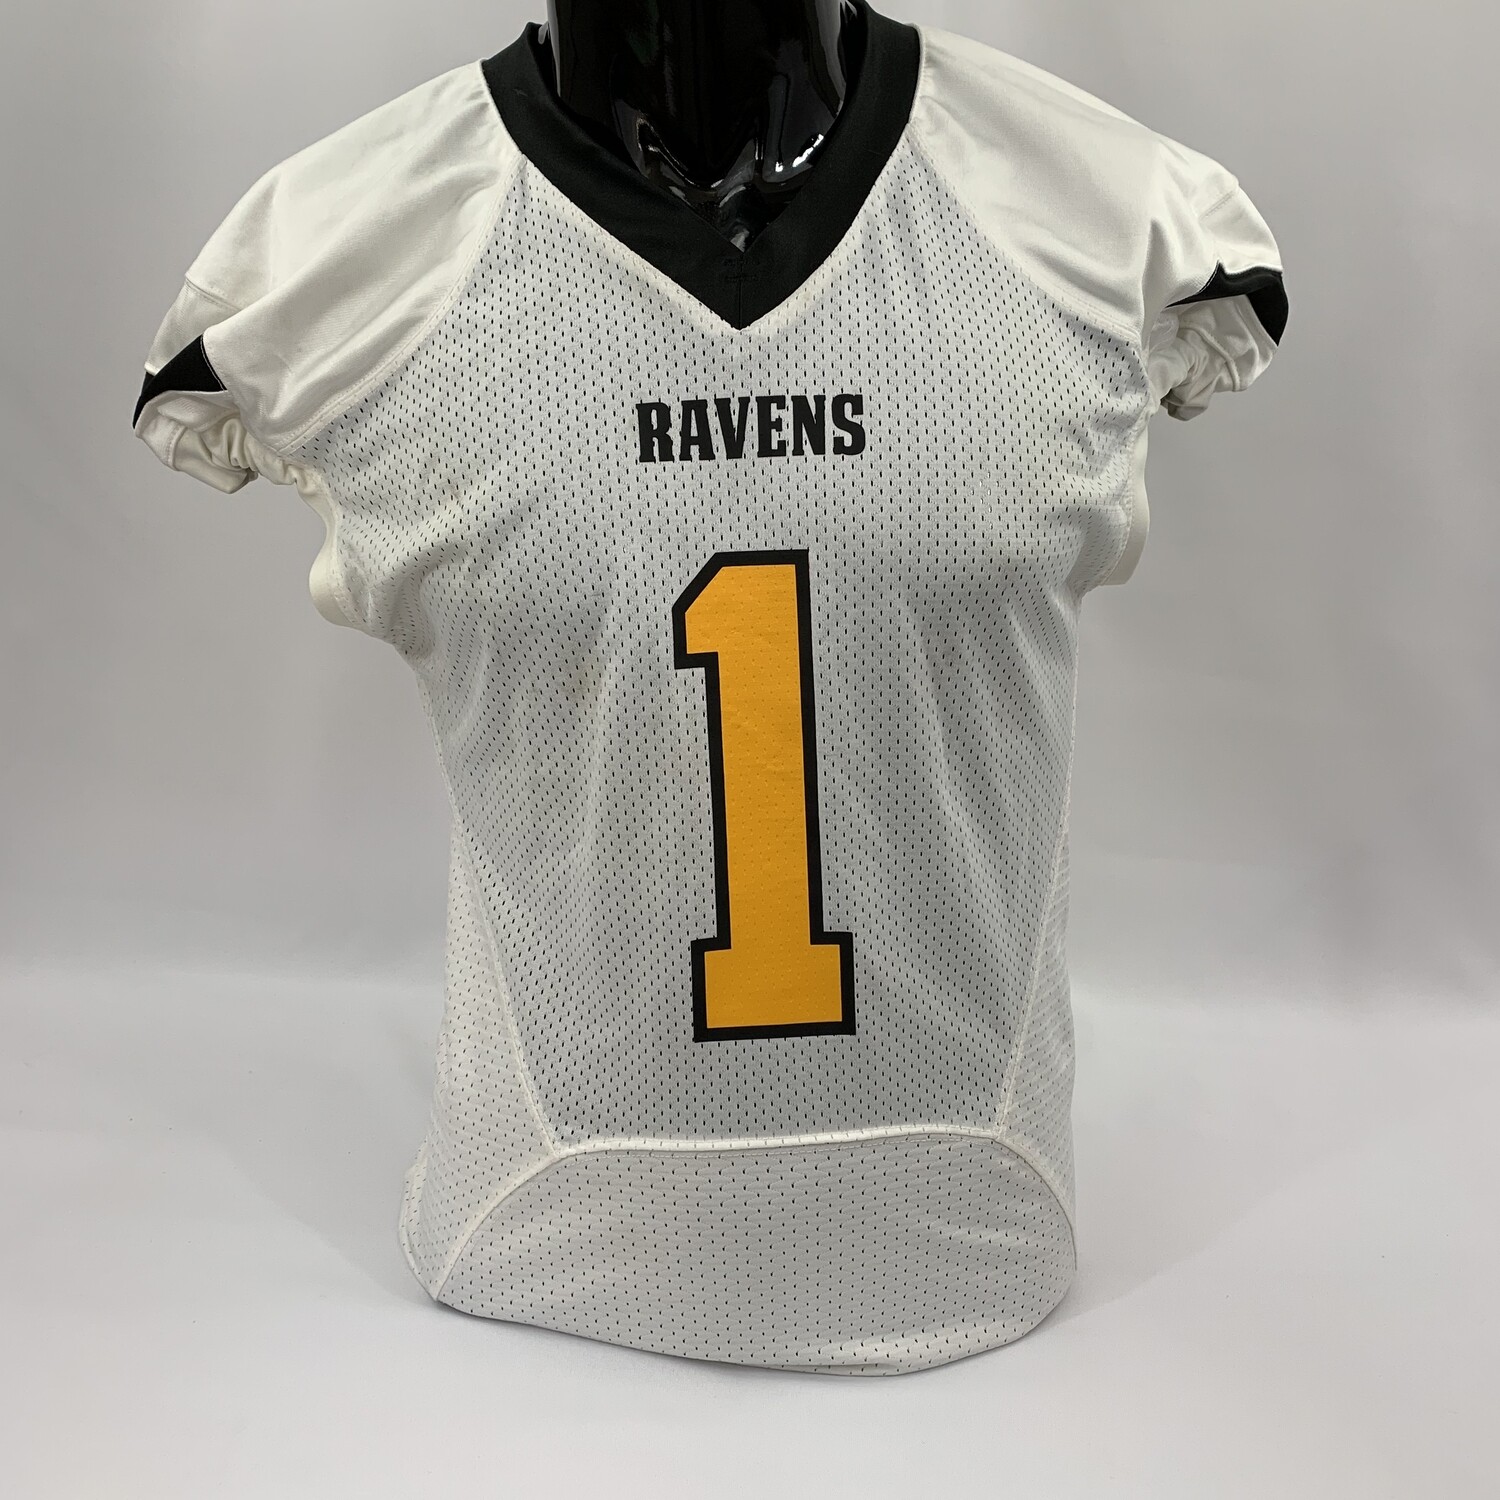 White with Gold and Black - RAVENS (Away)